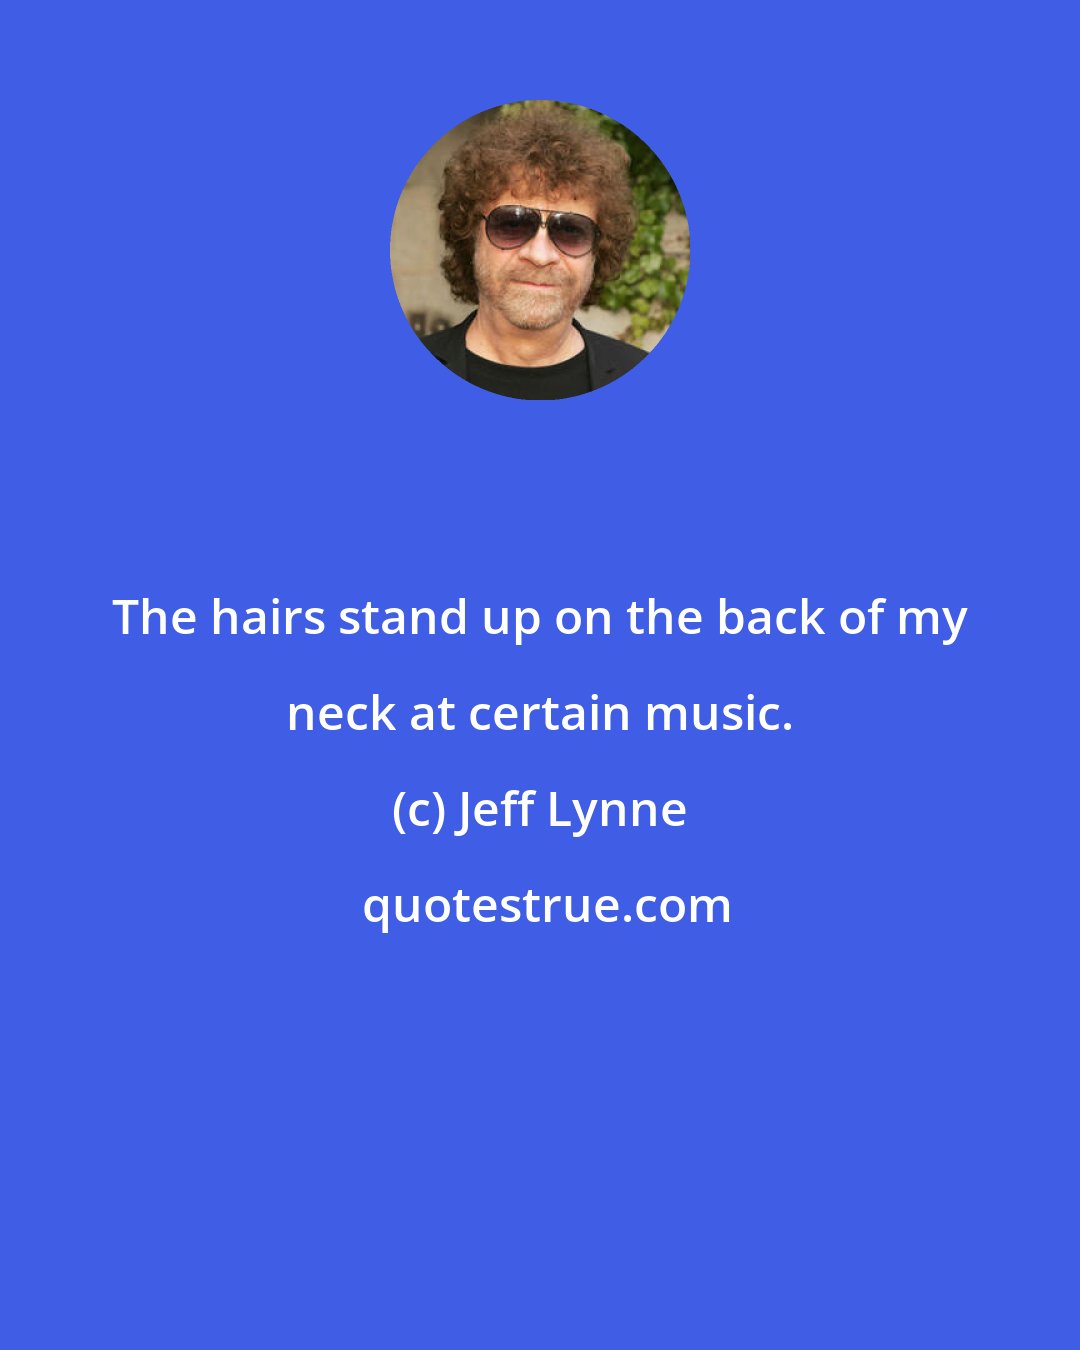 Jeff Lynne: The hairs stand up on the back of my neck at certain music.